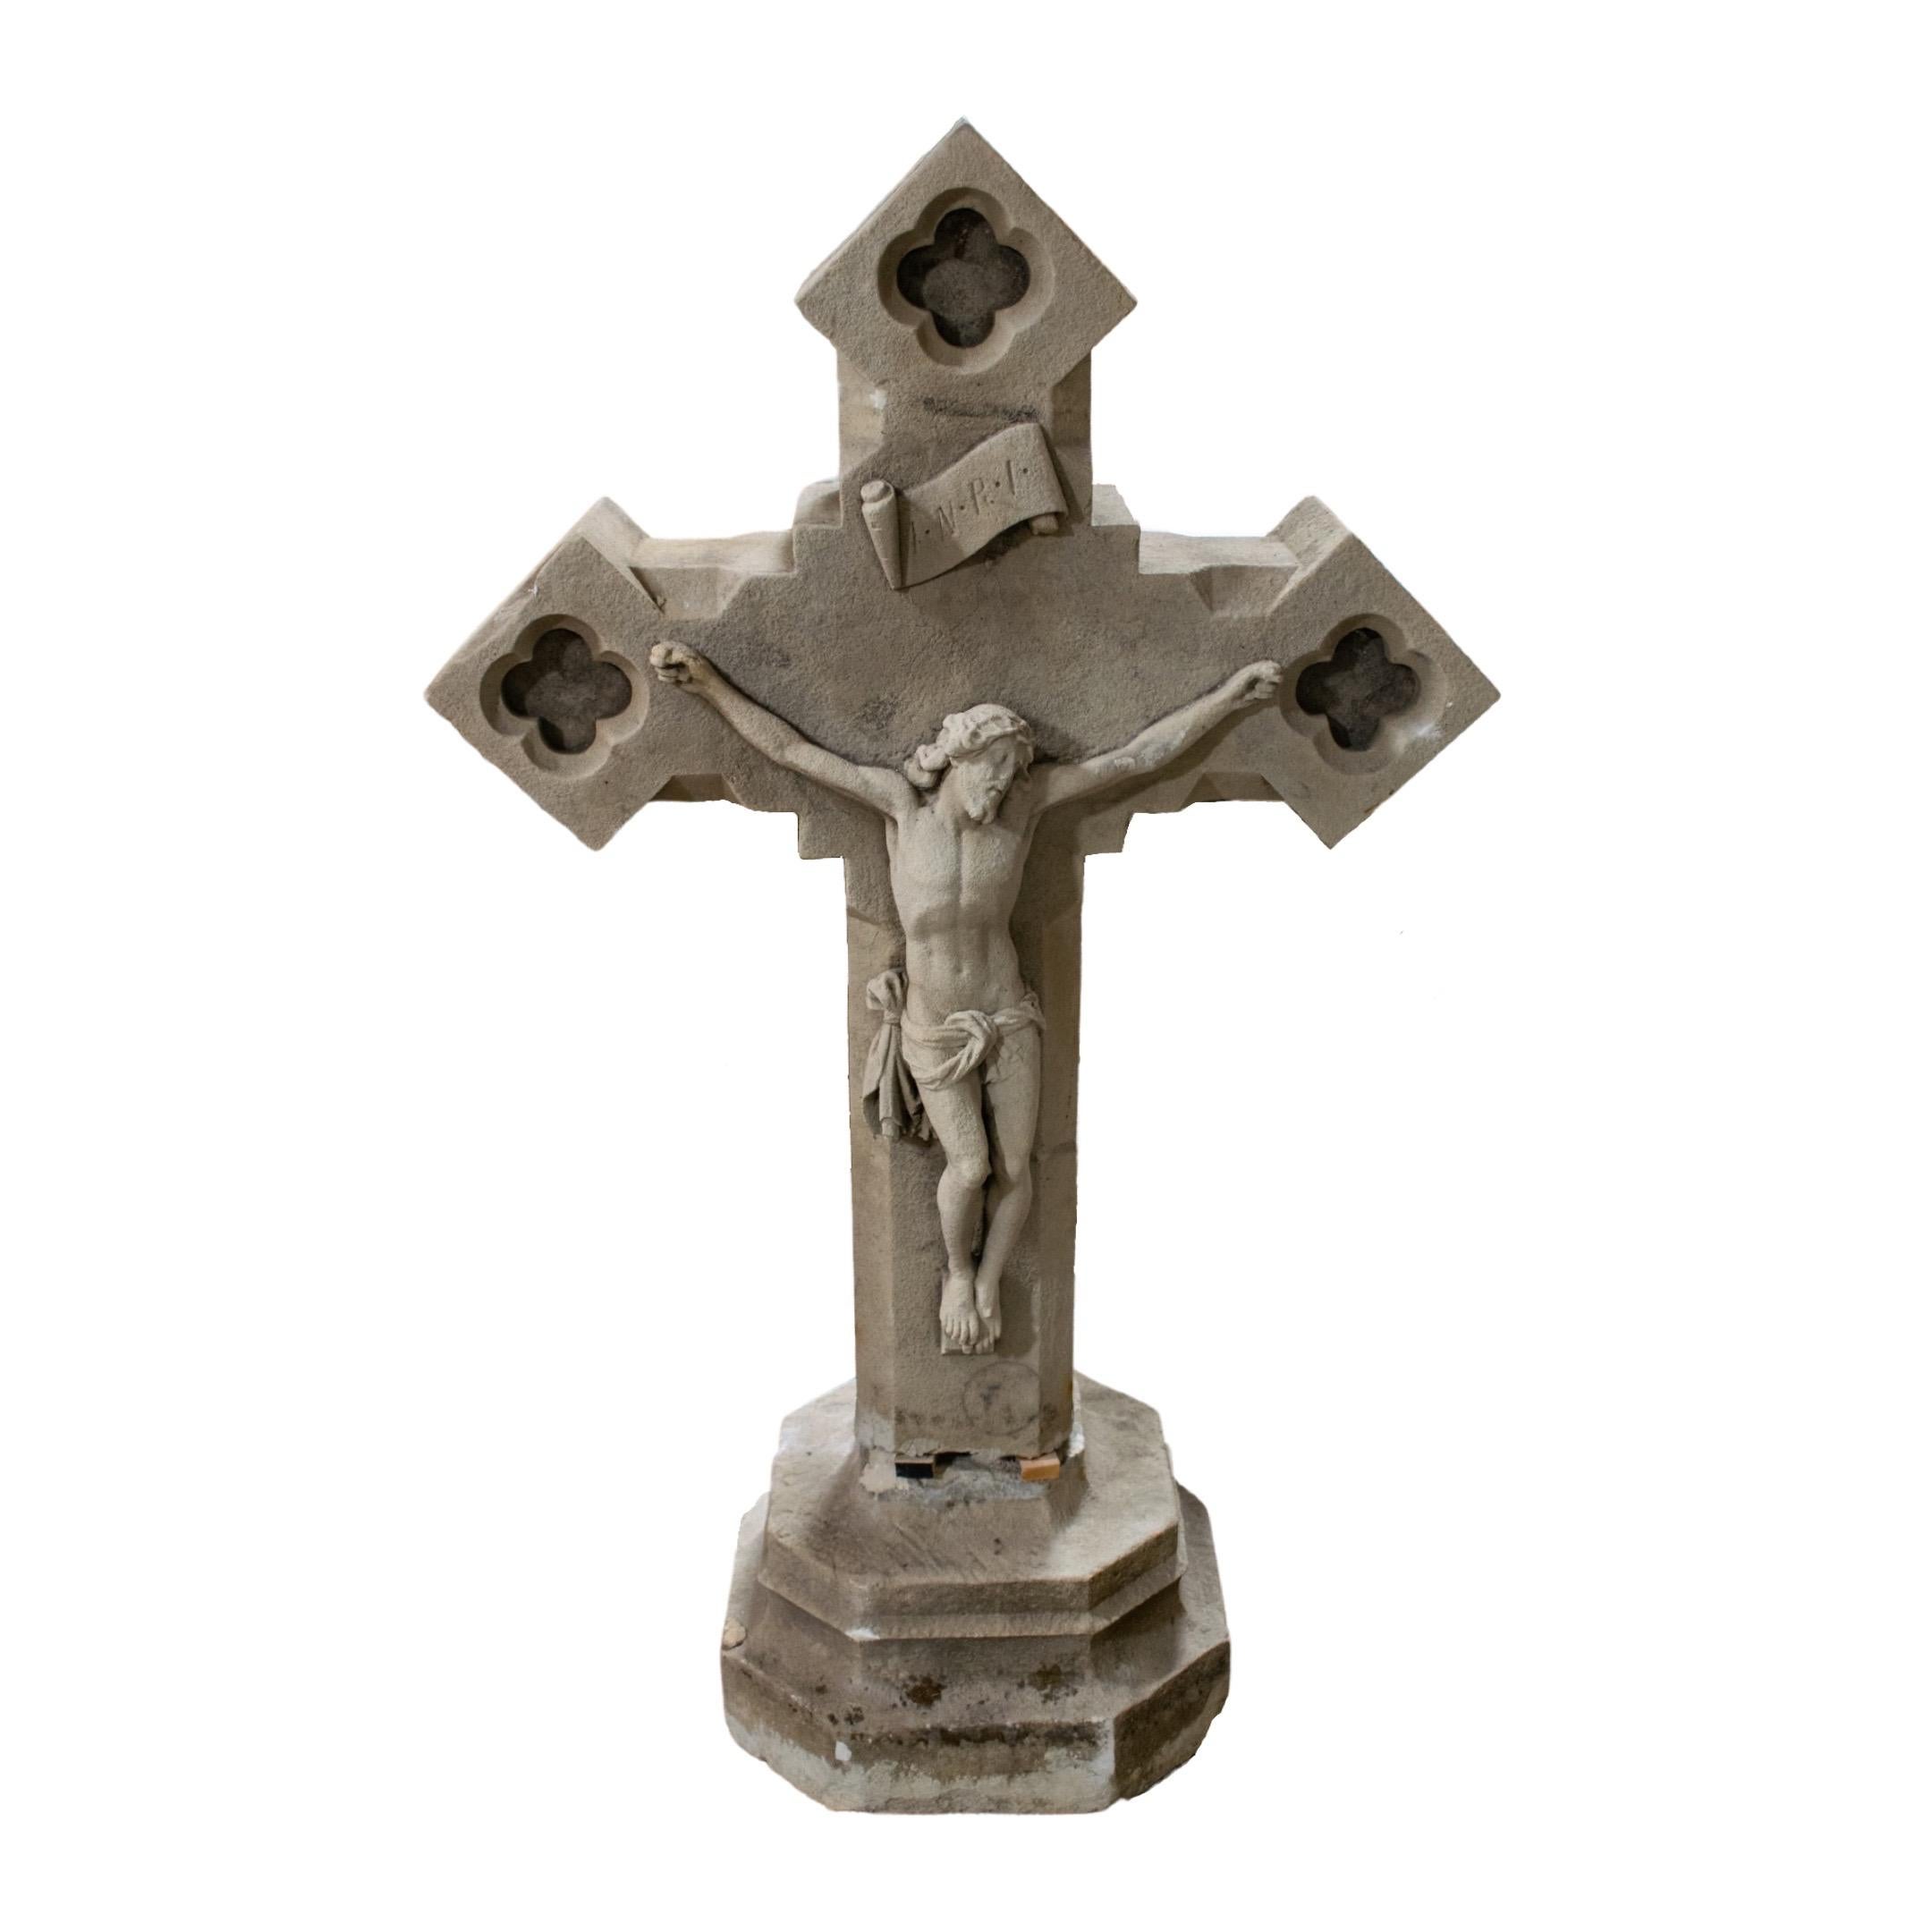 Cross with a craved depiction of Jesus. Made out of Limestone. Originates from France. Circa, 18th c.